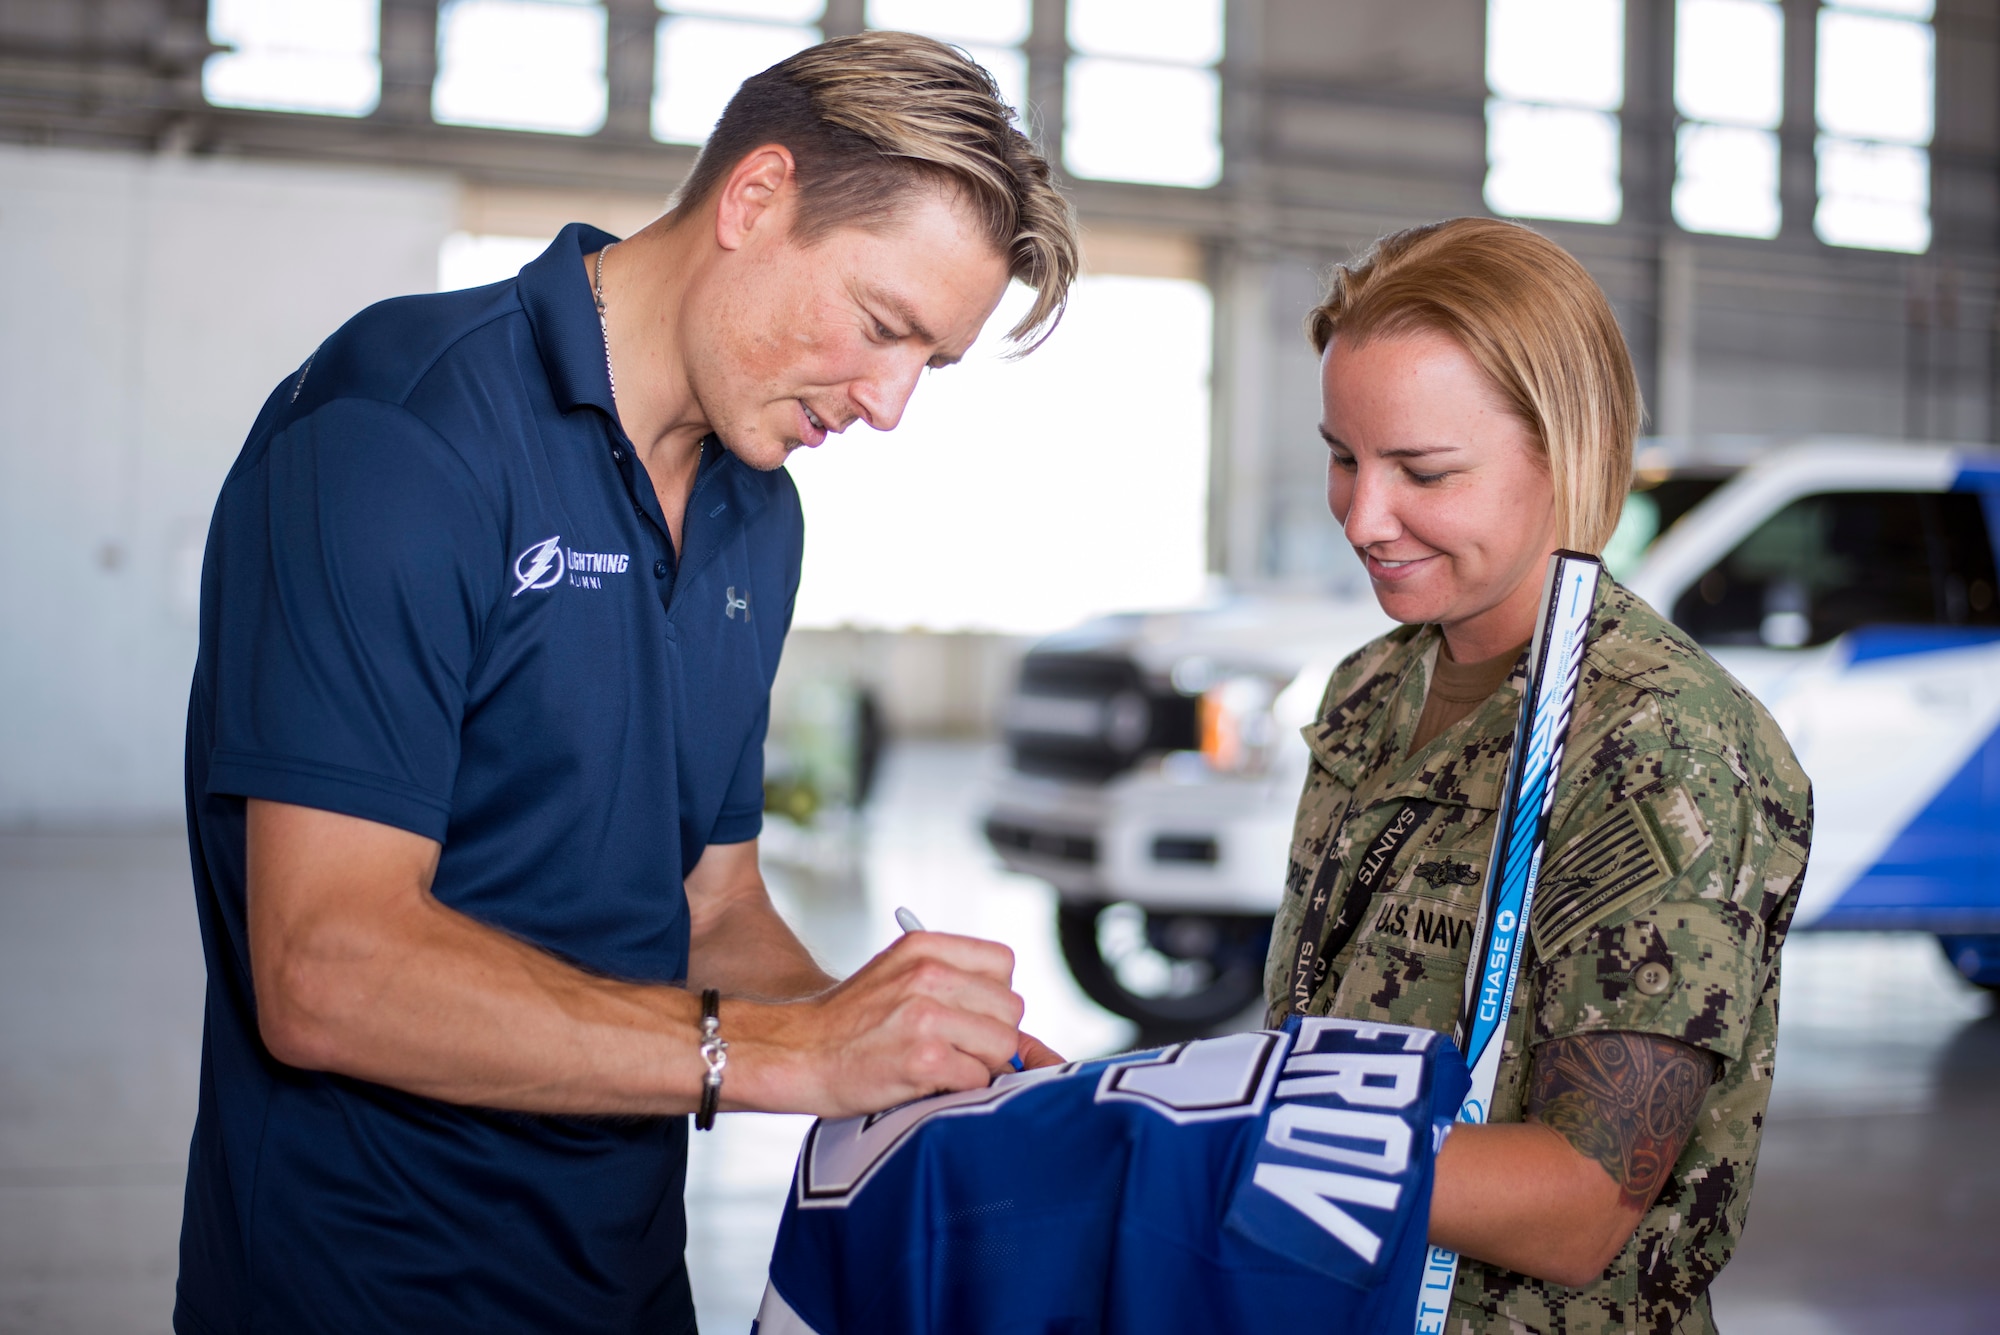 Former Tampa Bay Lightning player, Ruslan Fedotenko, signs a jersey for U.S. Navy Petty Officer 1st Class Taylor Horne, a leading petty officer assigned to Central Command’s Battle Damage Assessment team, at MacDill Air Force Base, Florida, Oct. 25, 2018.